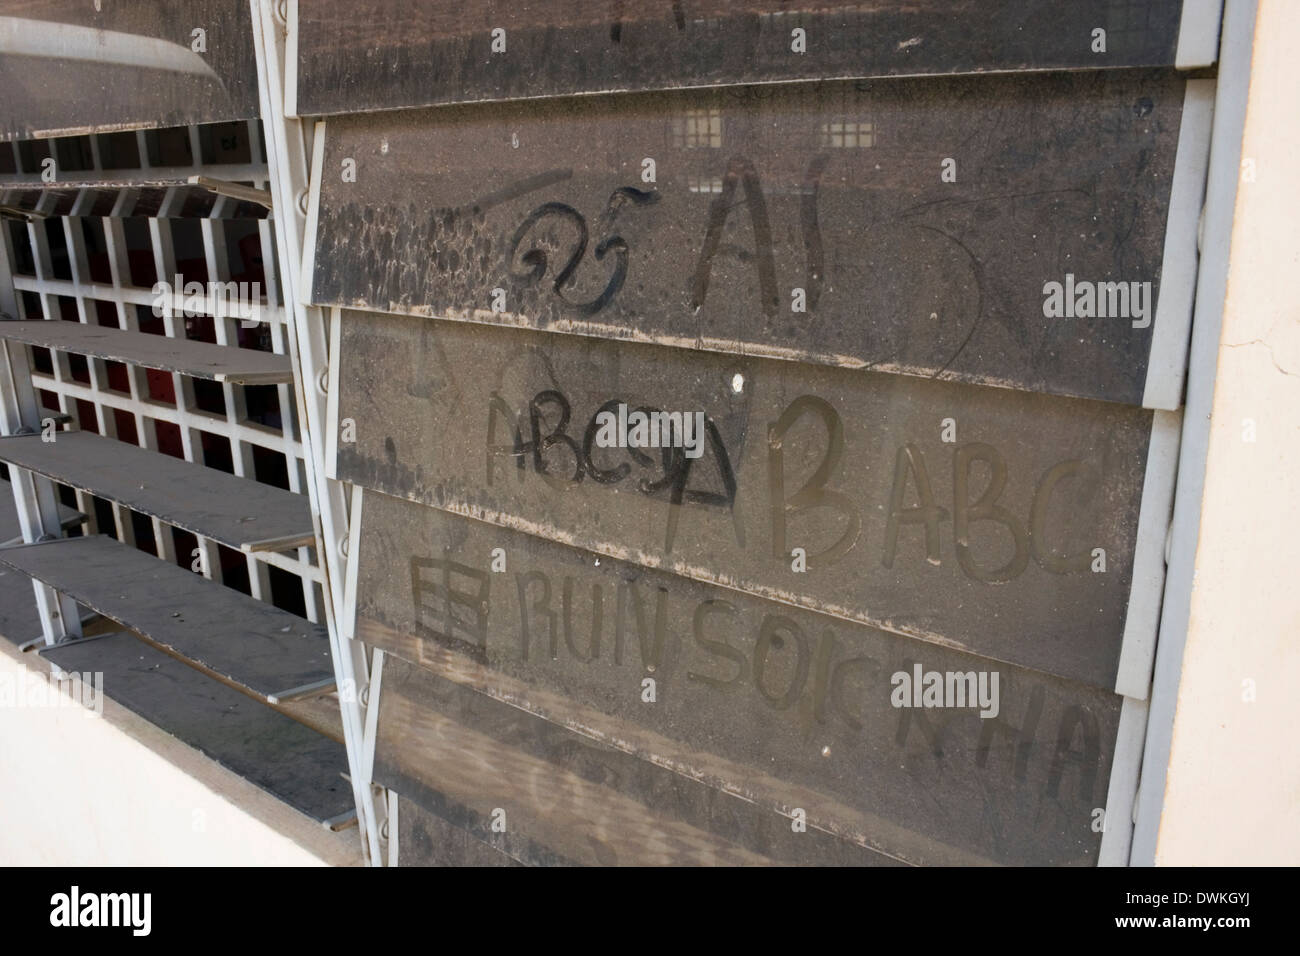 Graffiti is writtten on a dusty and dirty louvered glass window at a classroom Stock Photo